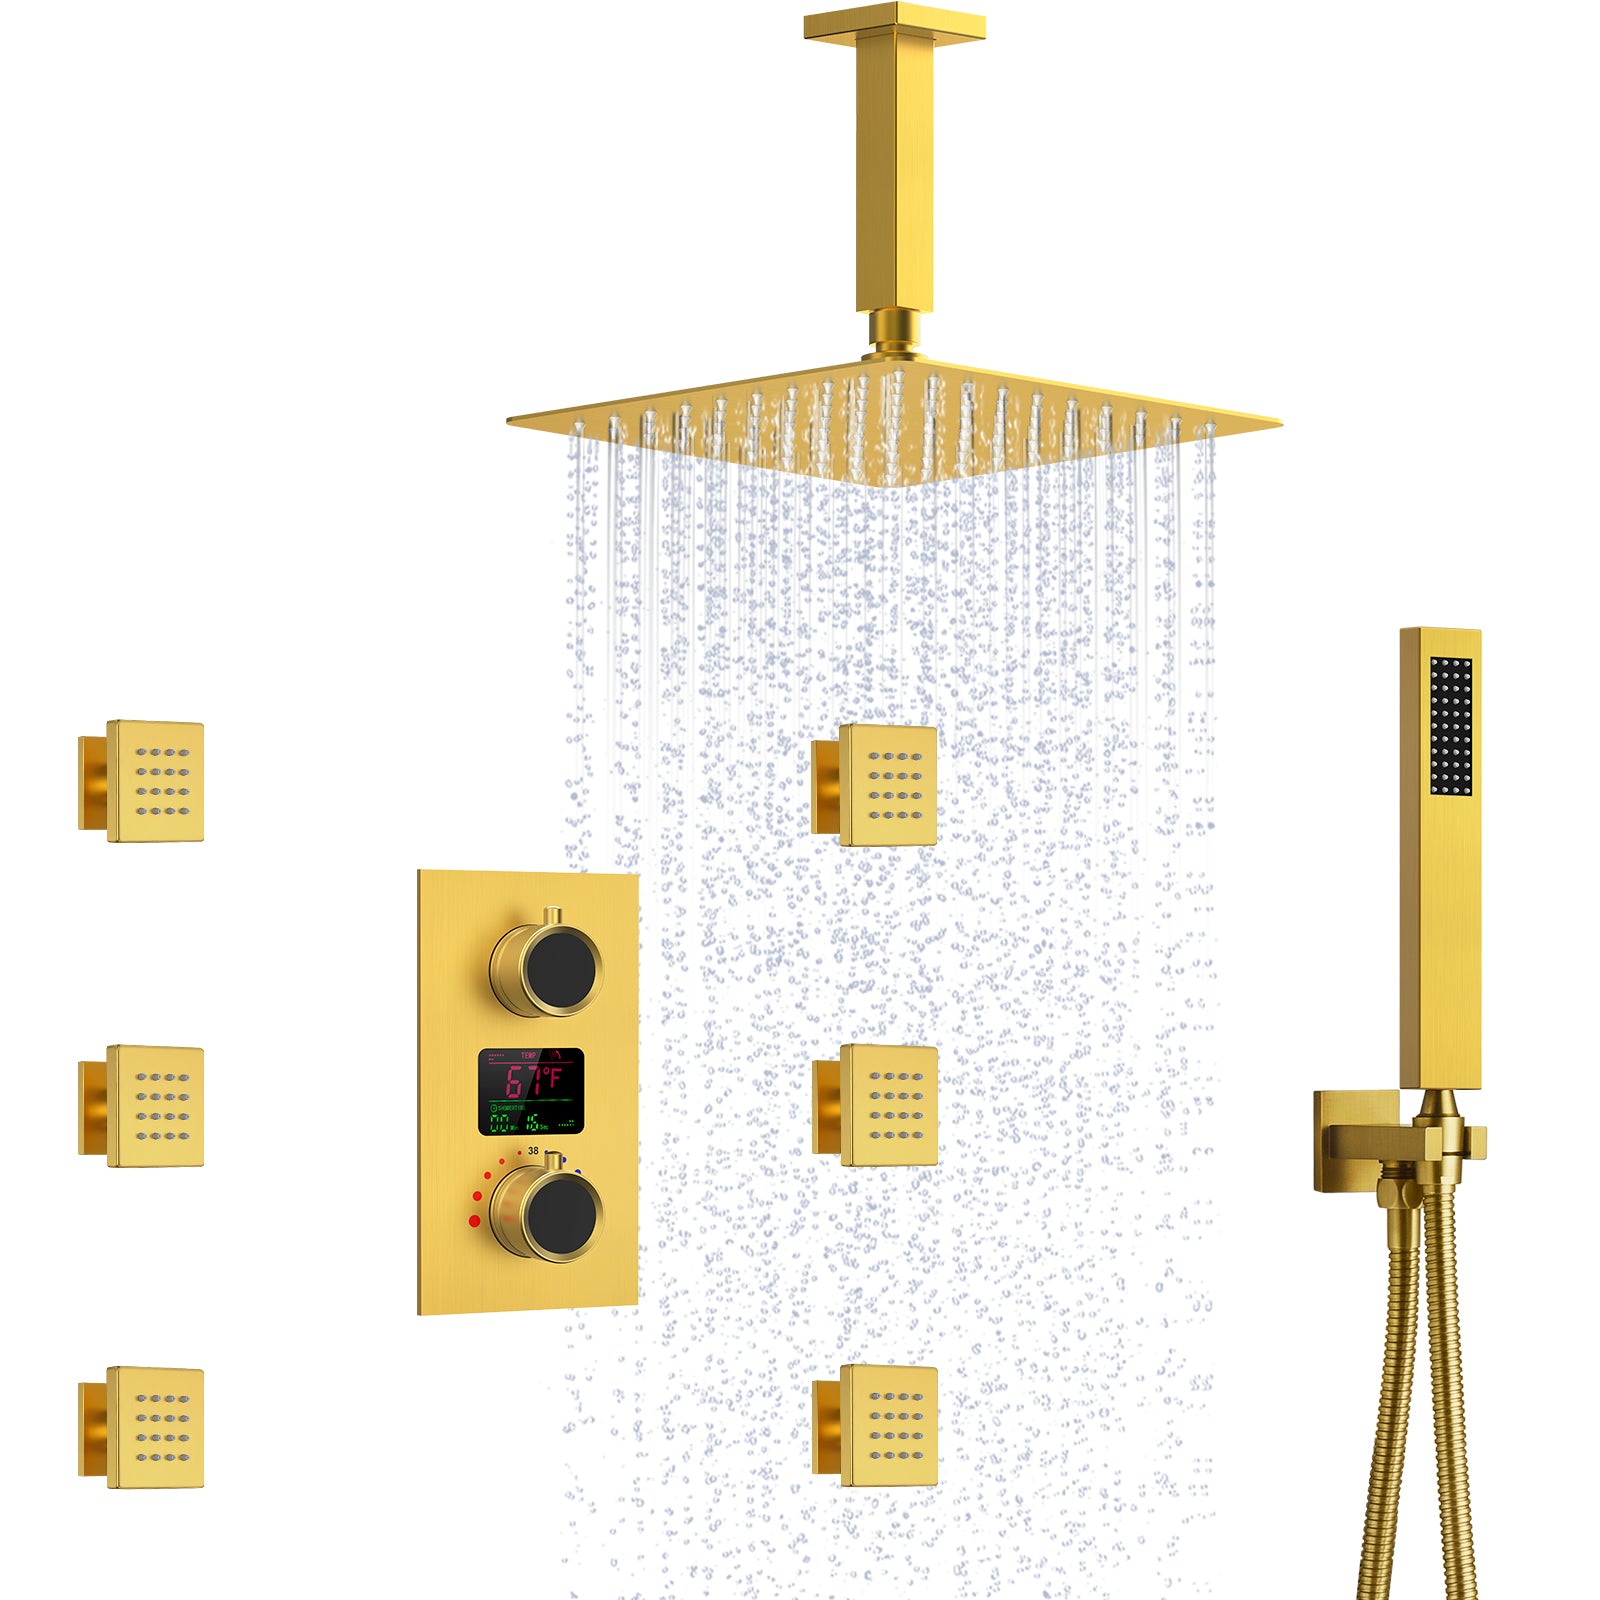 SFS-1015-GD12 EVERSTEIN Ceiling installation Constant Temperature Shower Faucet with LED Display Rain Shower System, with 6 Massage Nozzles and Hand-held Spray,Brushed Gold